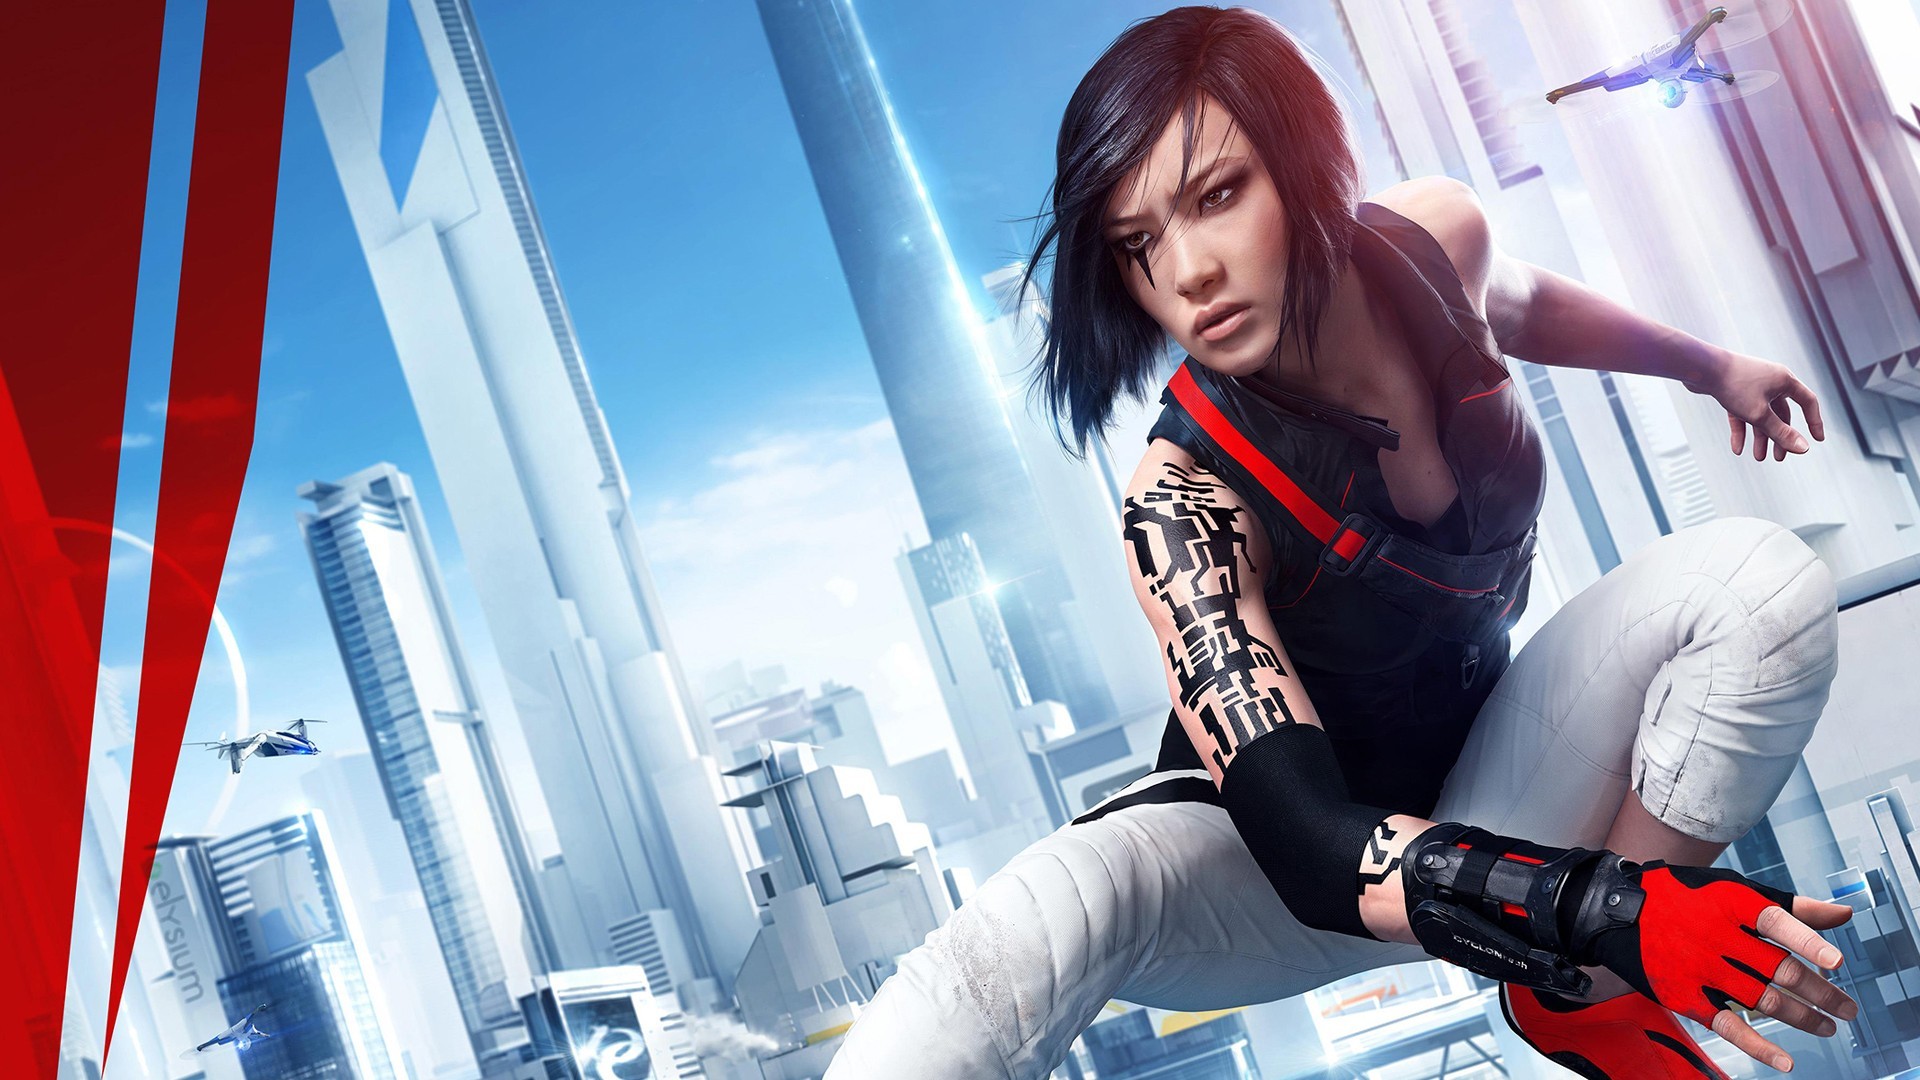 General 1920x1080 video games Mirror's Edge Mirror's Edge Catalyst Faith Connors dice Electronic Arts PC gaming dark hair video game art video game girls looking into the distance